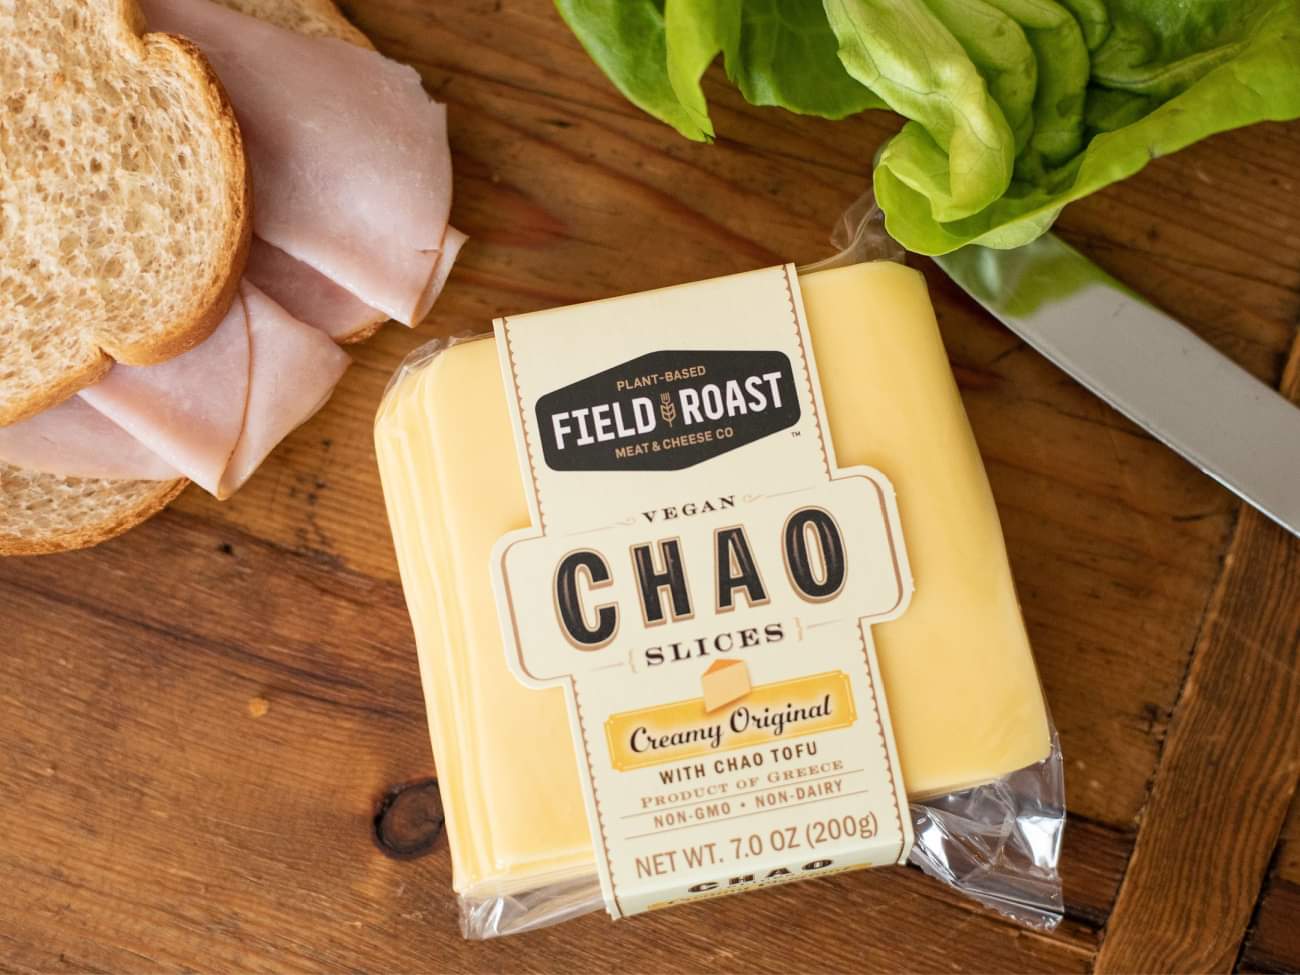 Chao Plant-Based Cheese As Low As $1.99 At Kroger (Regular Price $6.99)